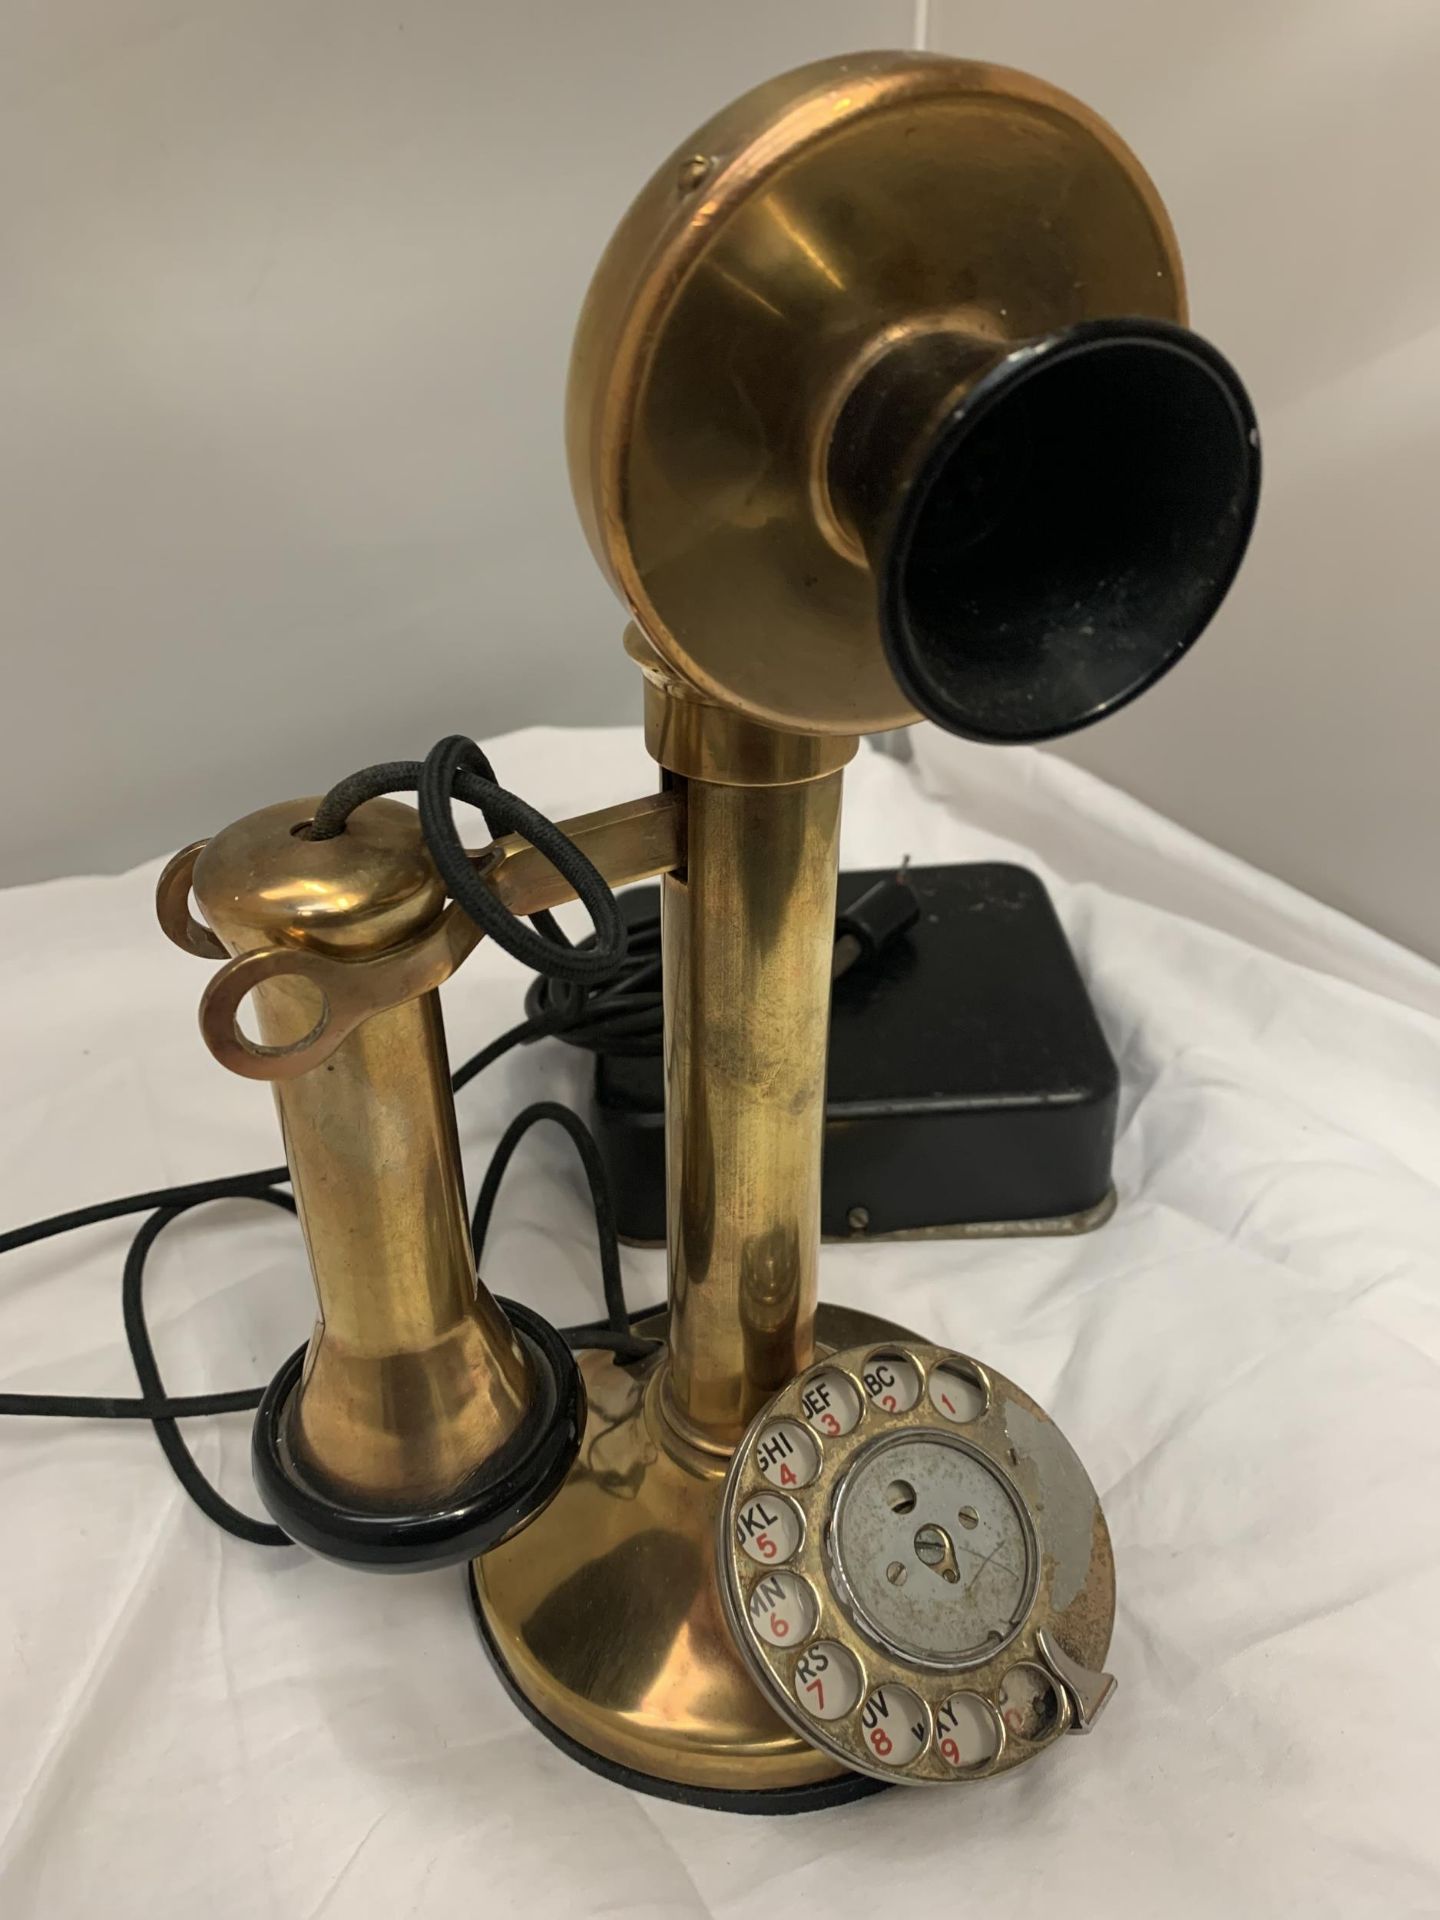 A BRASS 'CANDLESTICK' ROTARY DIAL TELEPHONE WITH EAR PIECE AND BOX - Image 2 of 5